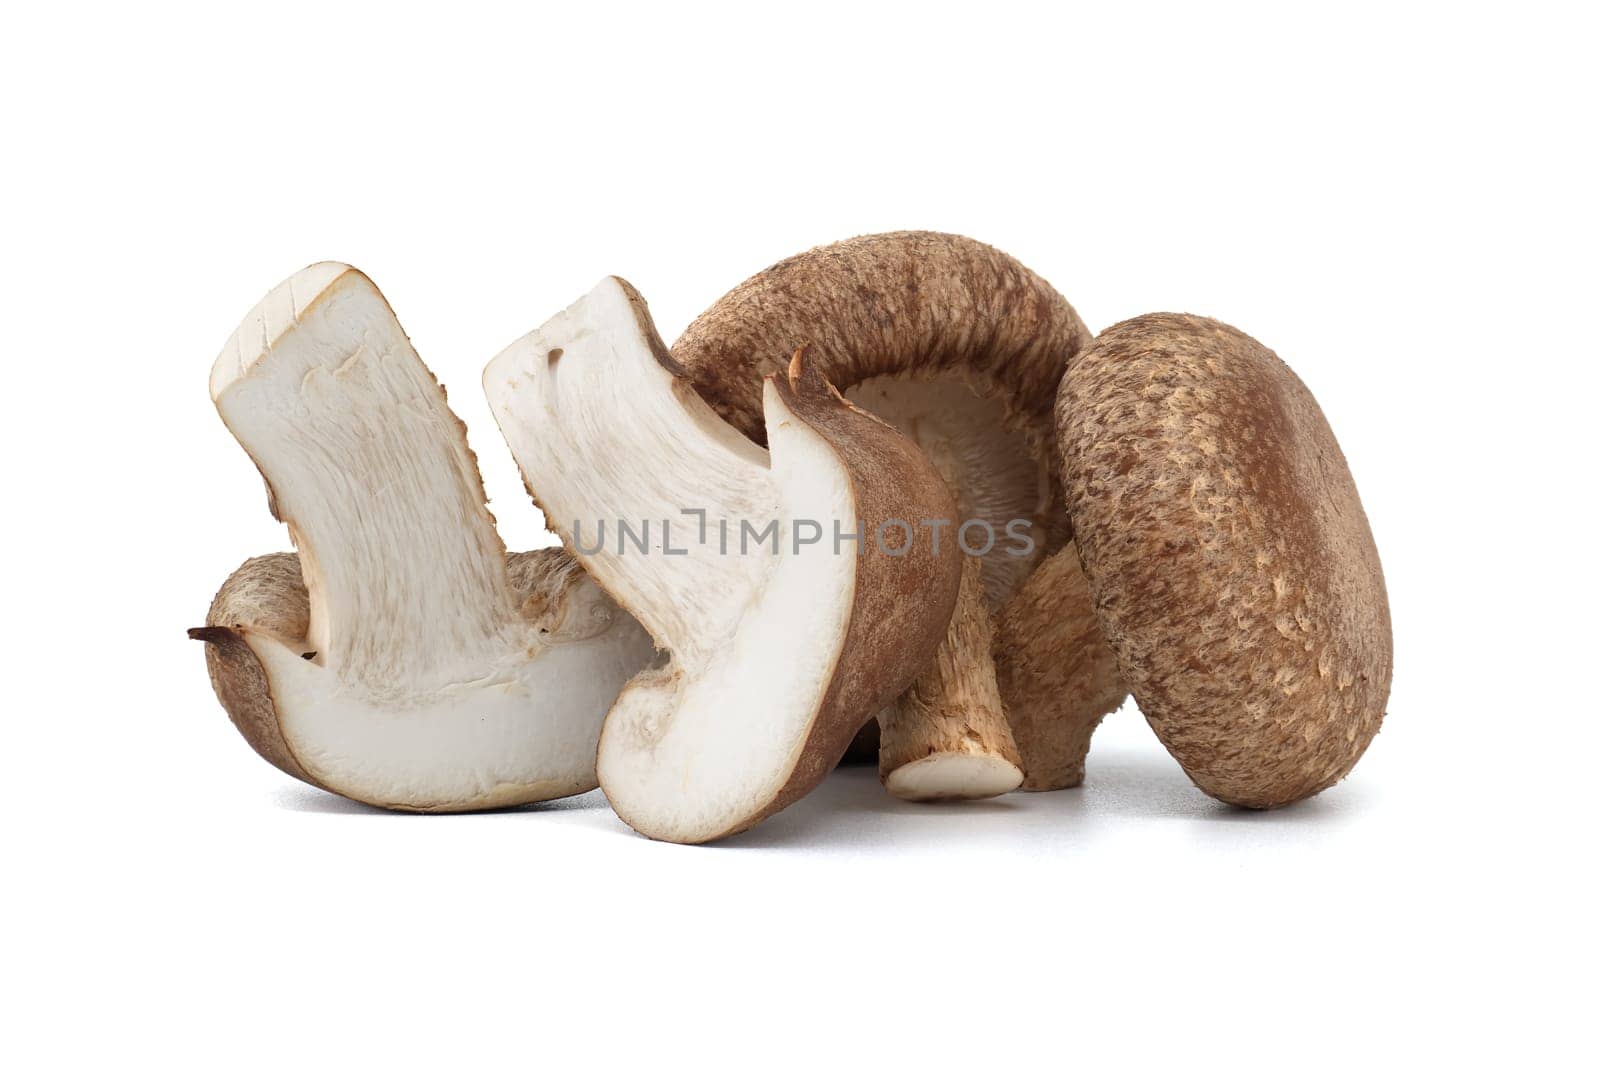 Shiitake mushrooms in close up isolated on white background by NetPix